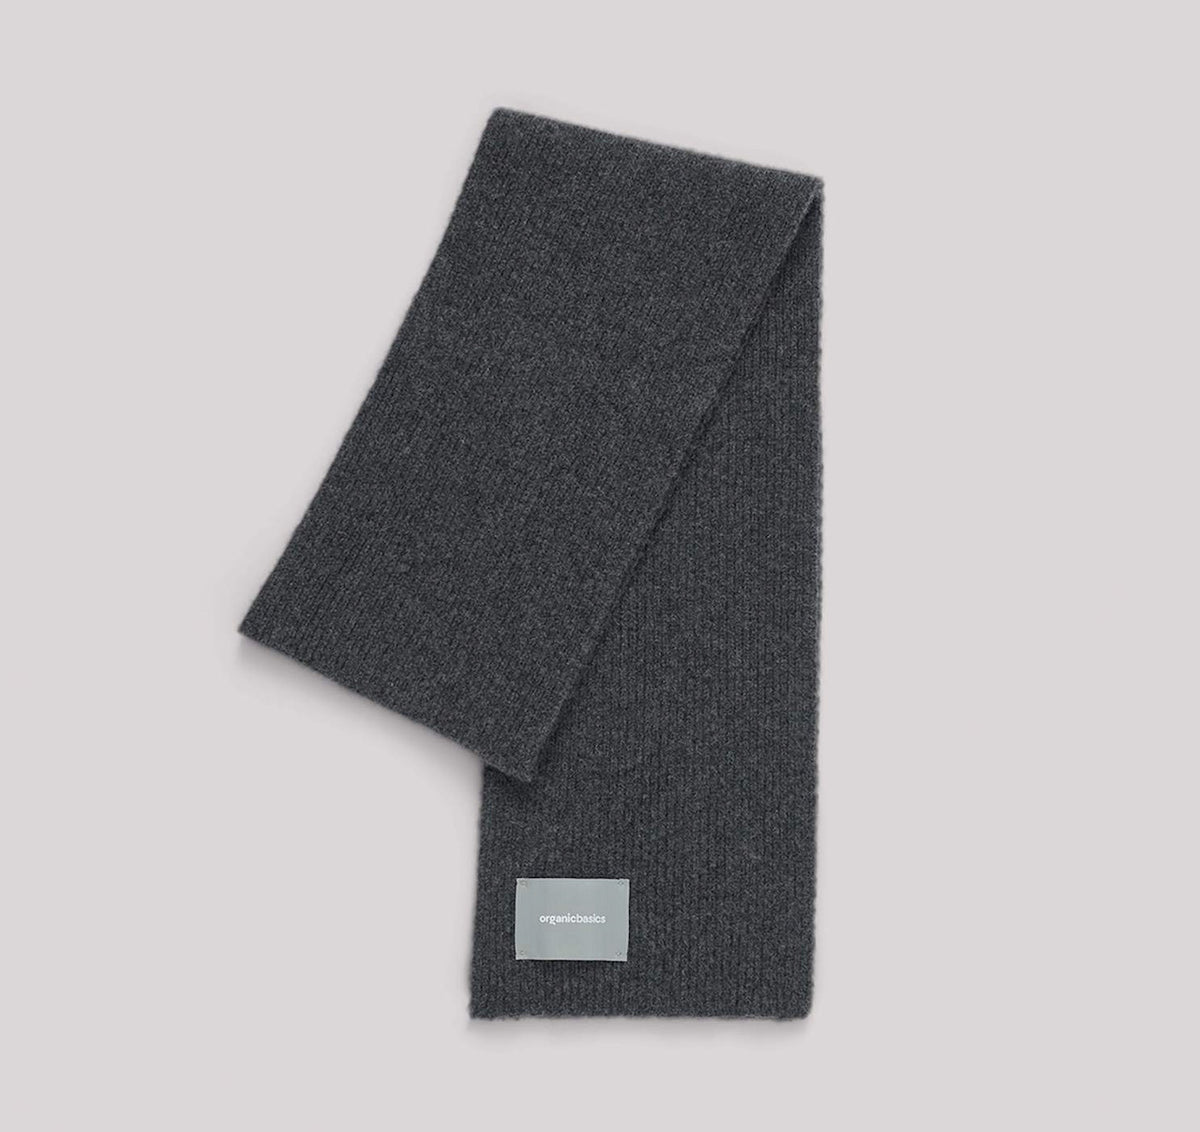 An Organic Basics Recycled Wool Scarf – Charcoal Melange with a label on it.